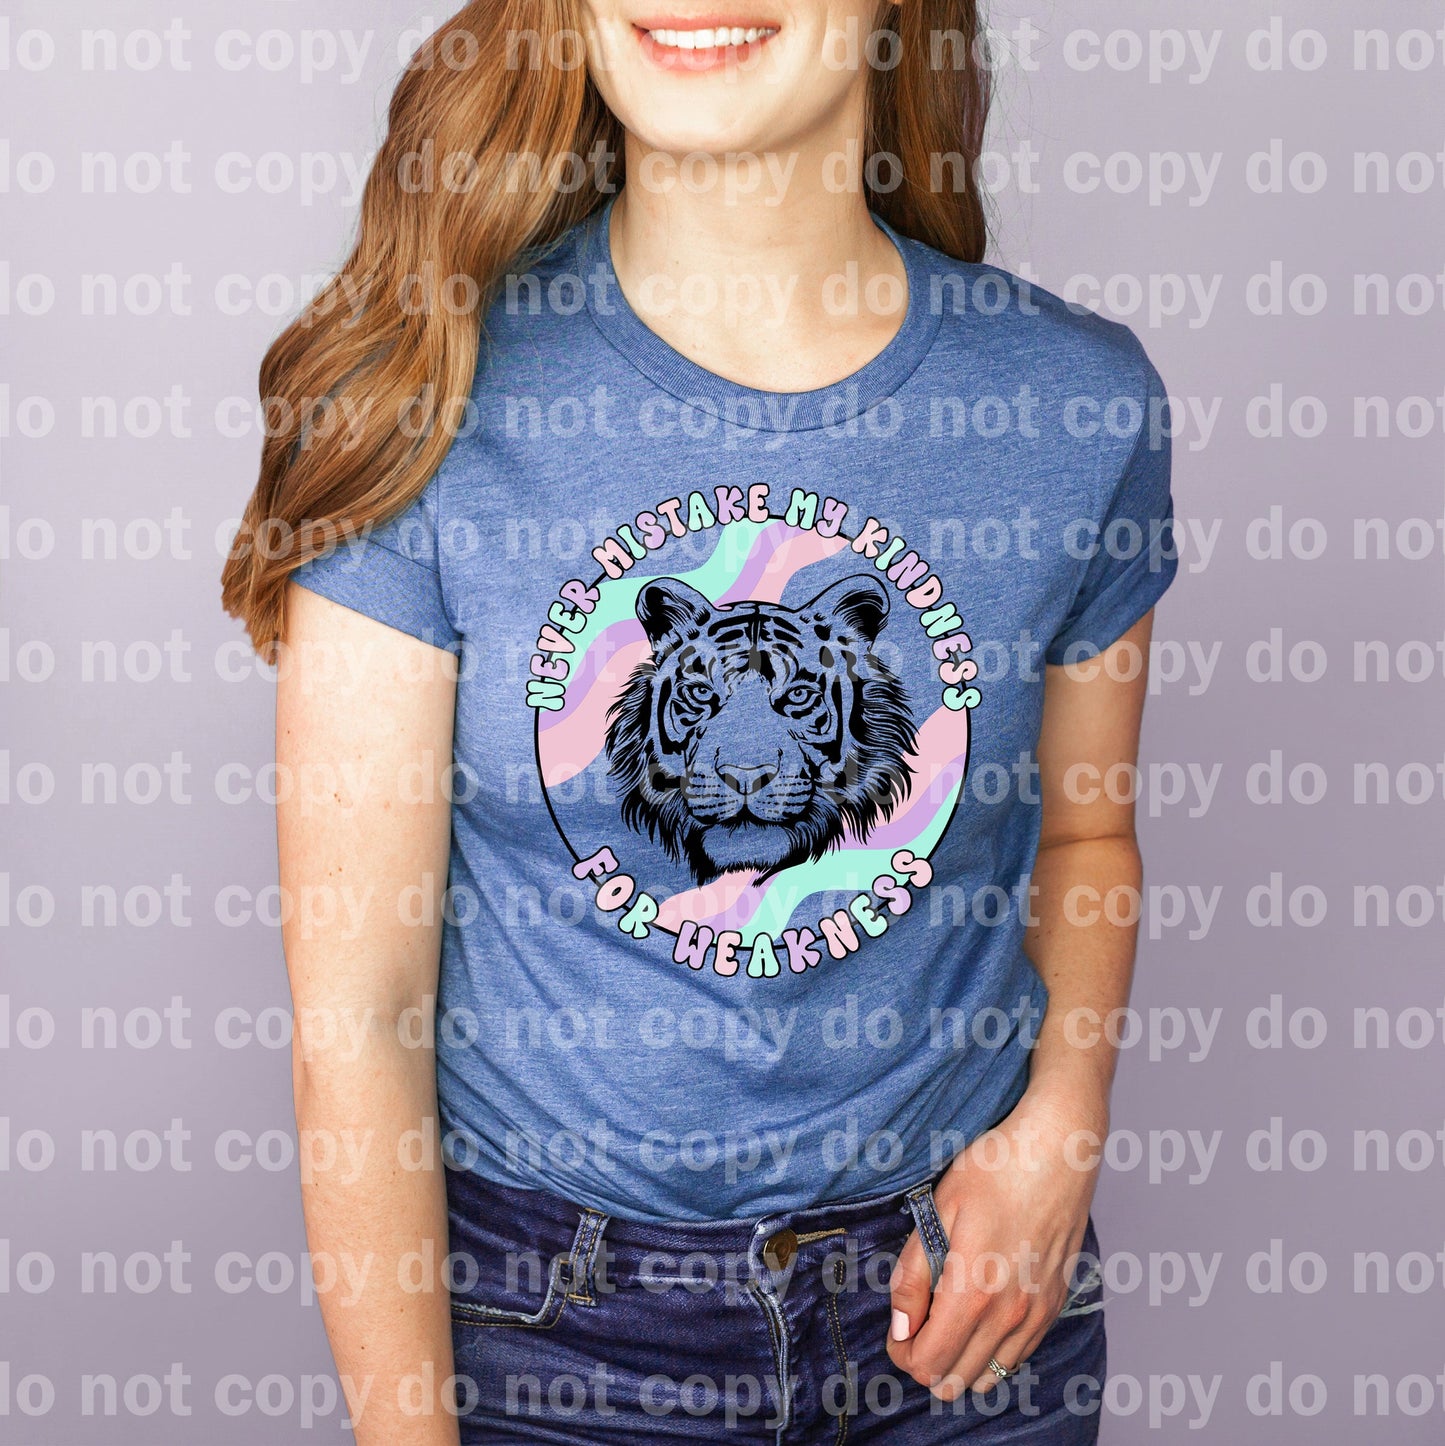 Never Mistake My Kindness For Weakness Dream Print or Sublimation Print